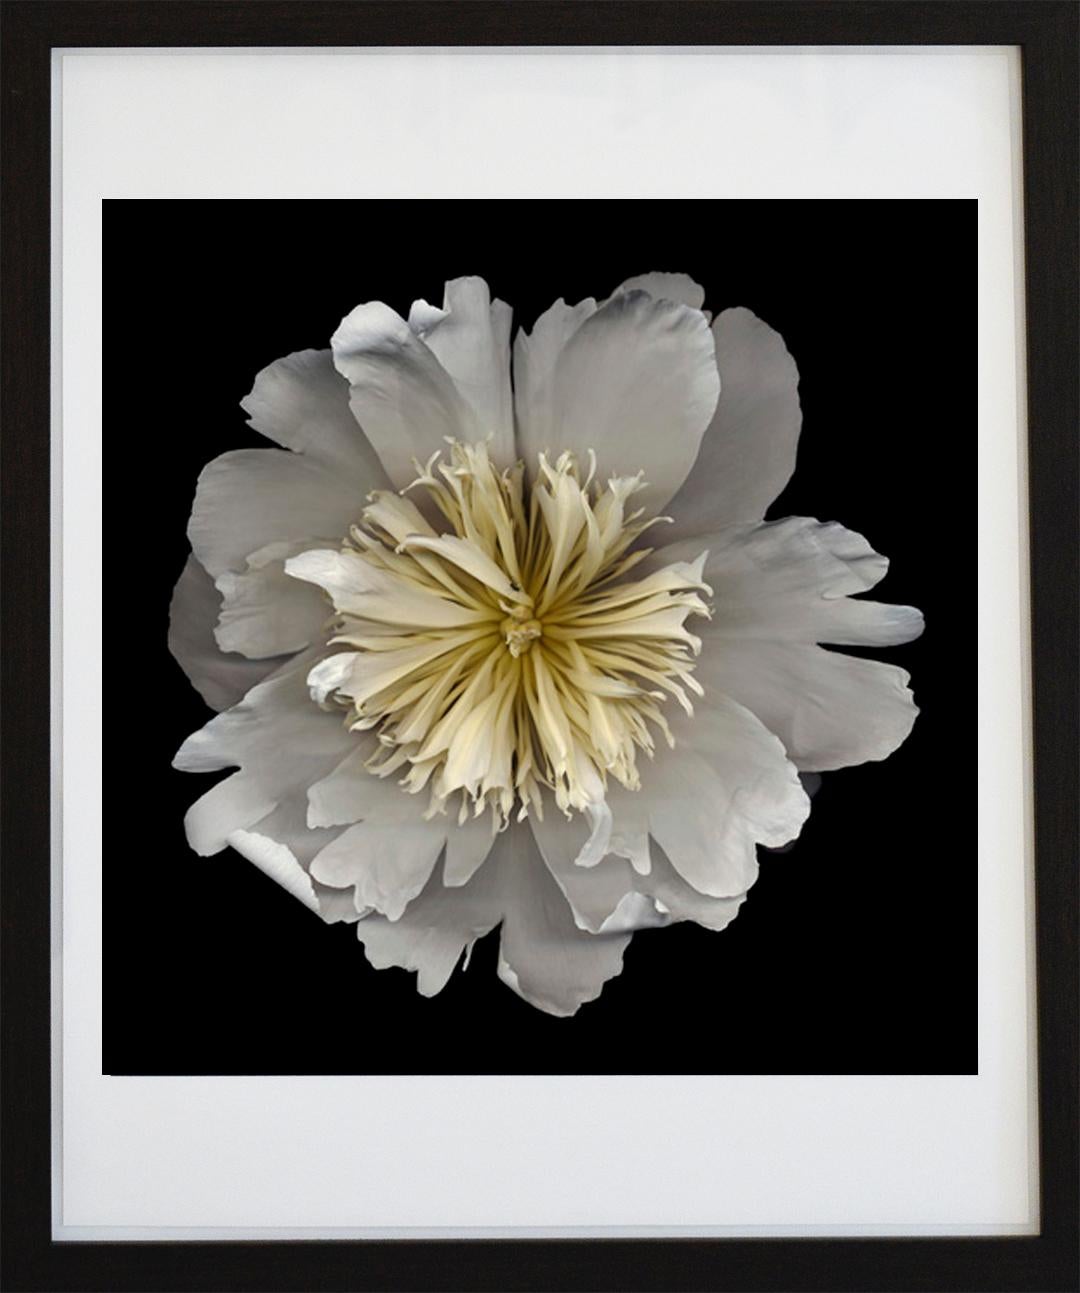 Chad Kleitsch Color Photograph - No. 18 (Framed Flower Still Life Photograph of a White Peony on Black) 